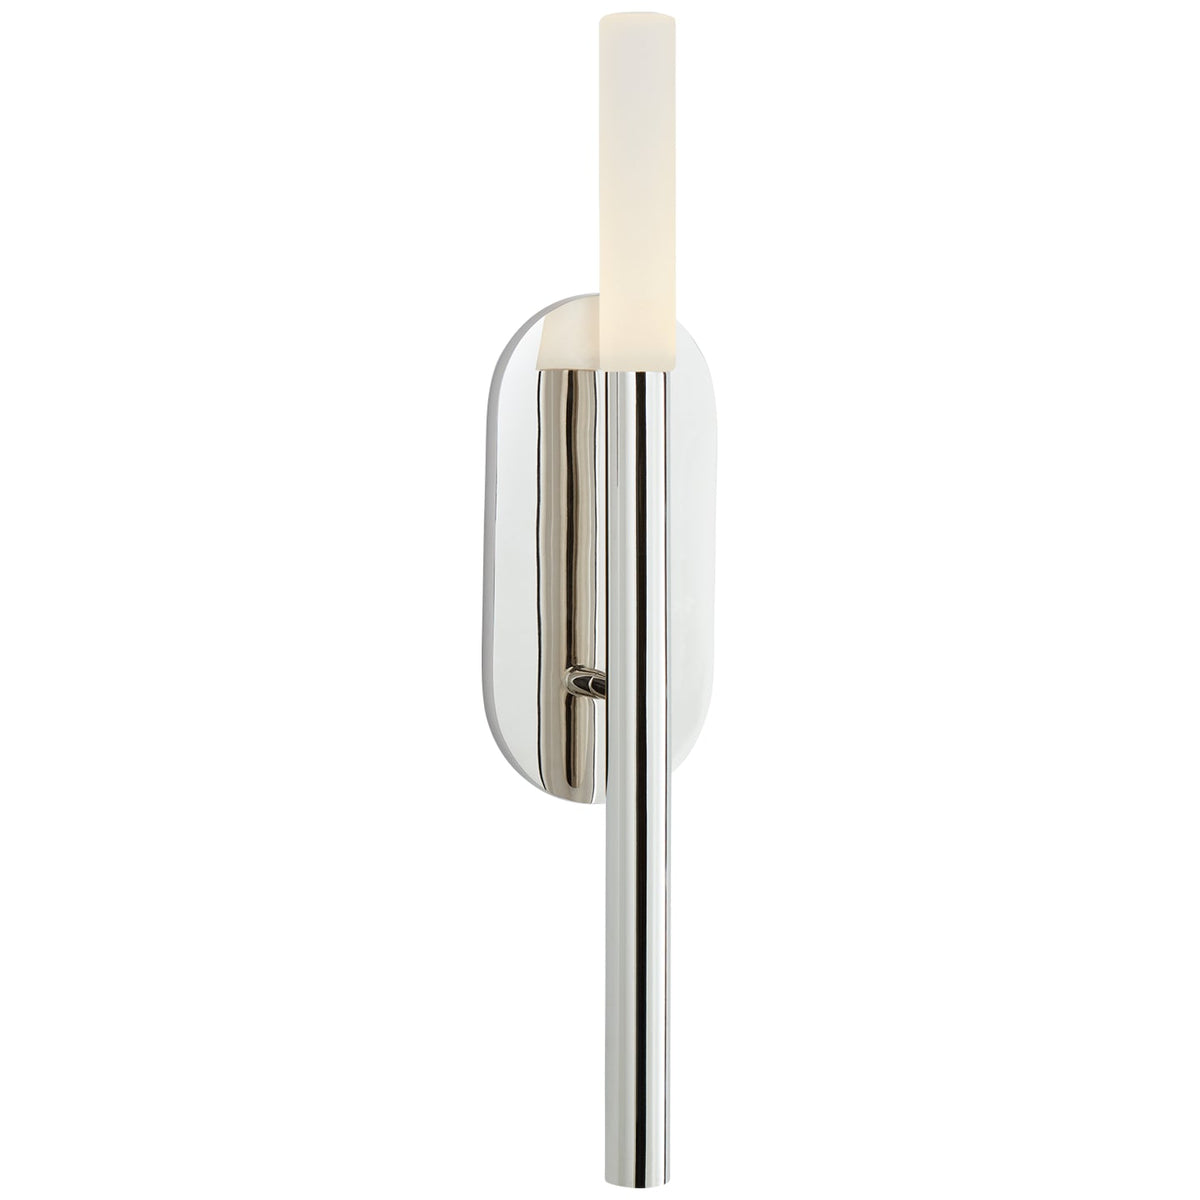 Rousseau Bath Sconce by Visual Comfort Signature | OVERSTOCK